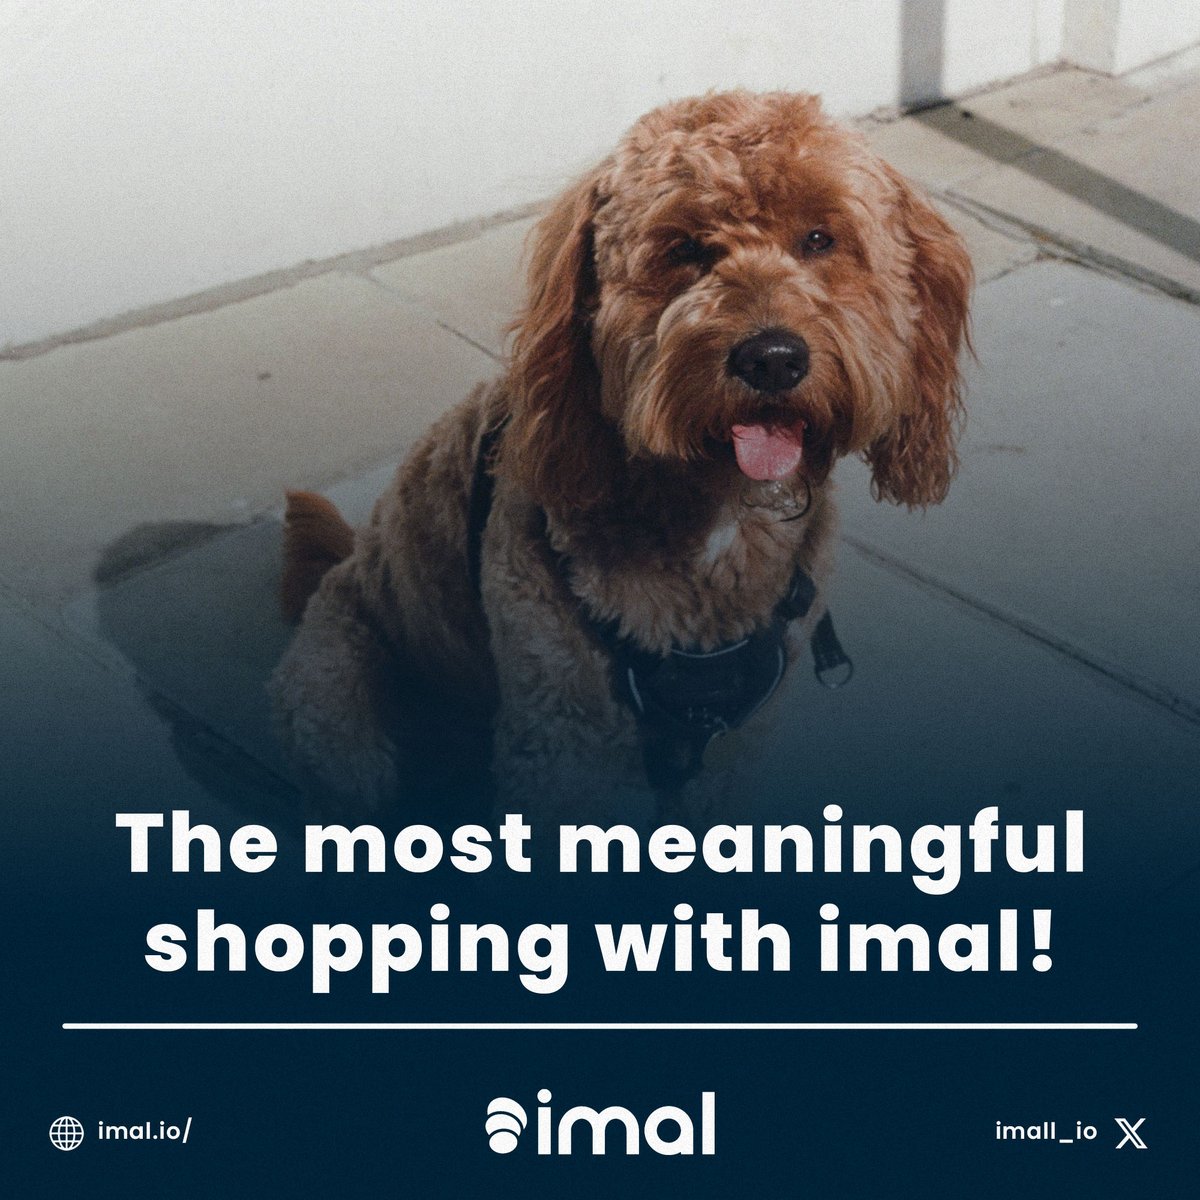 purr-fect shopping experience with imal. #imal #makeadifference #compassion